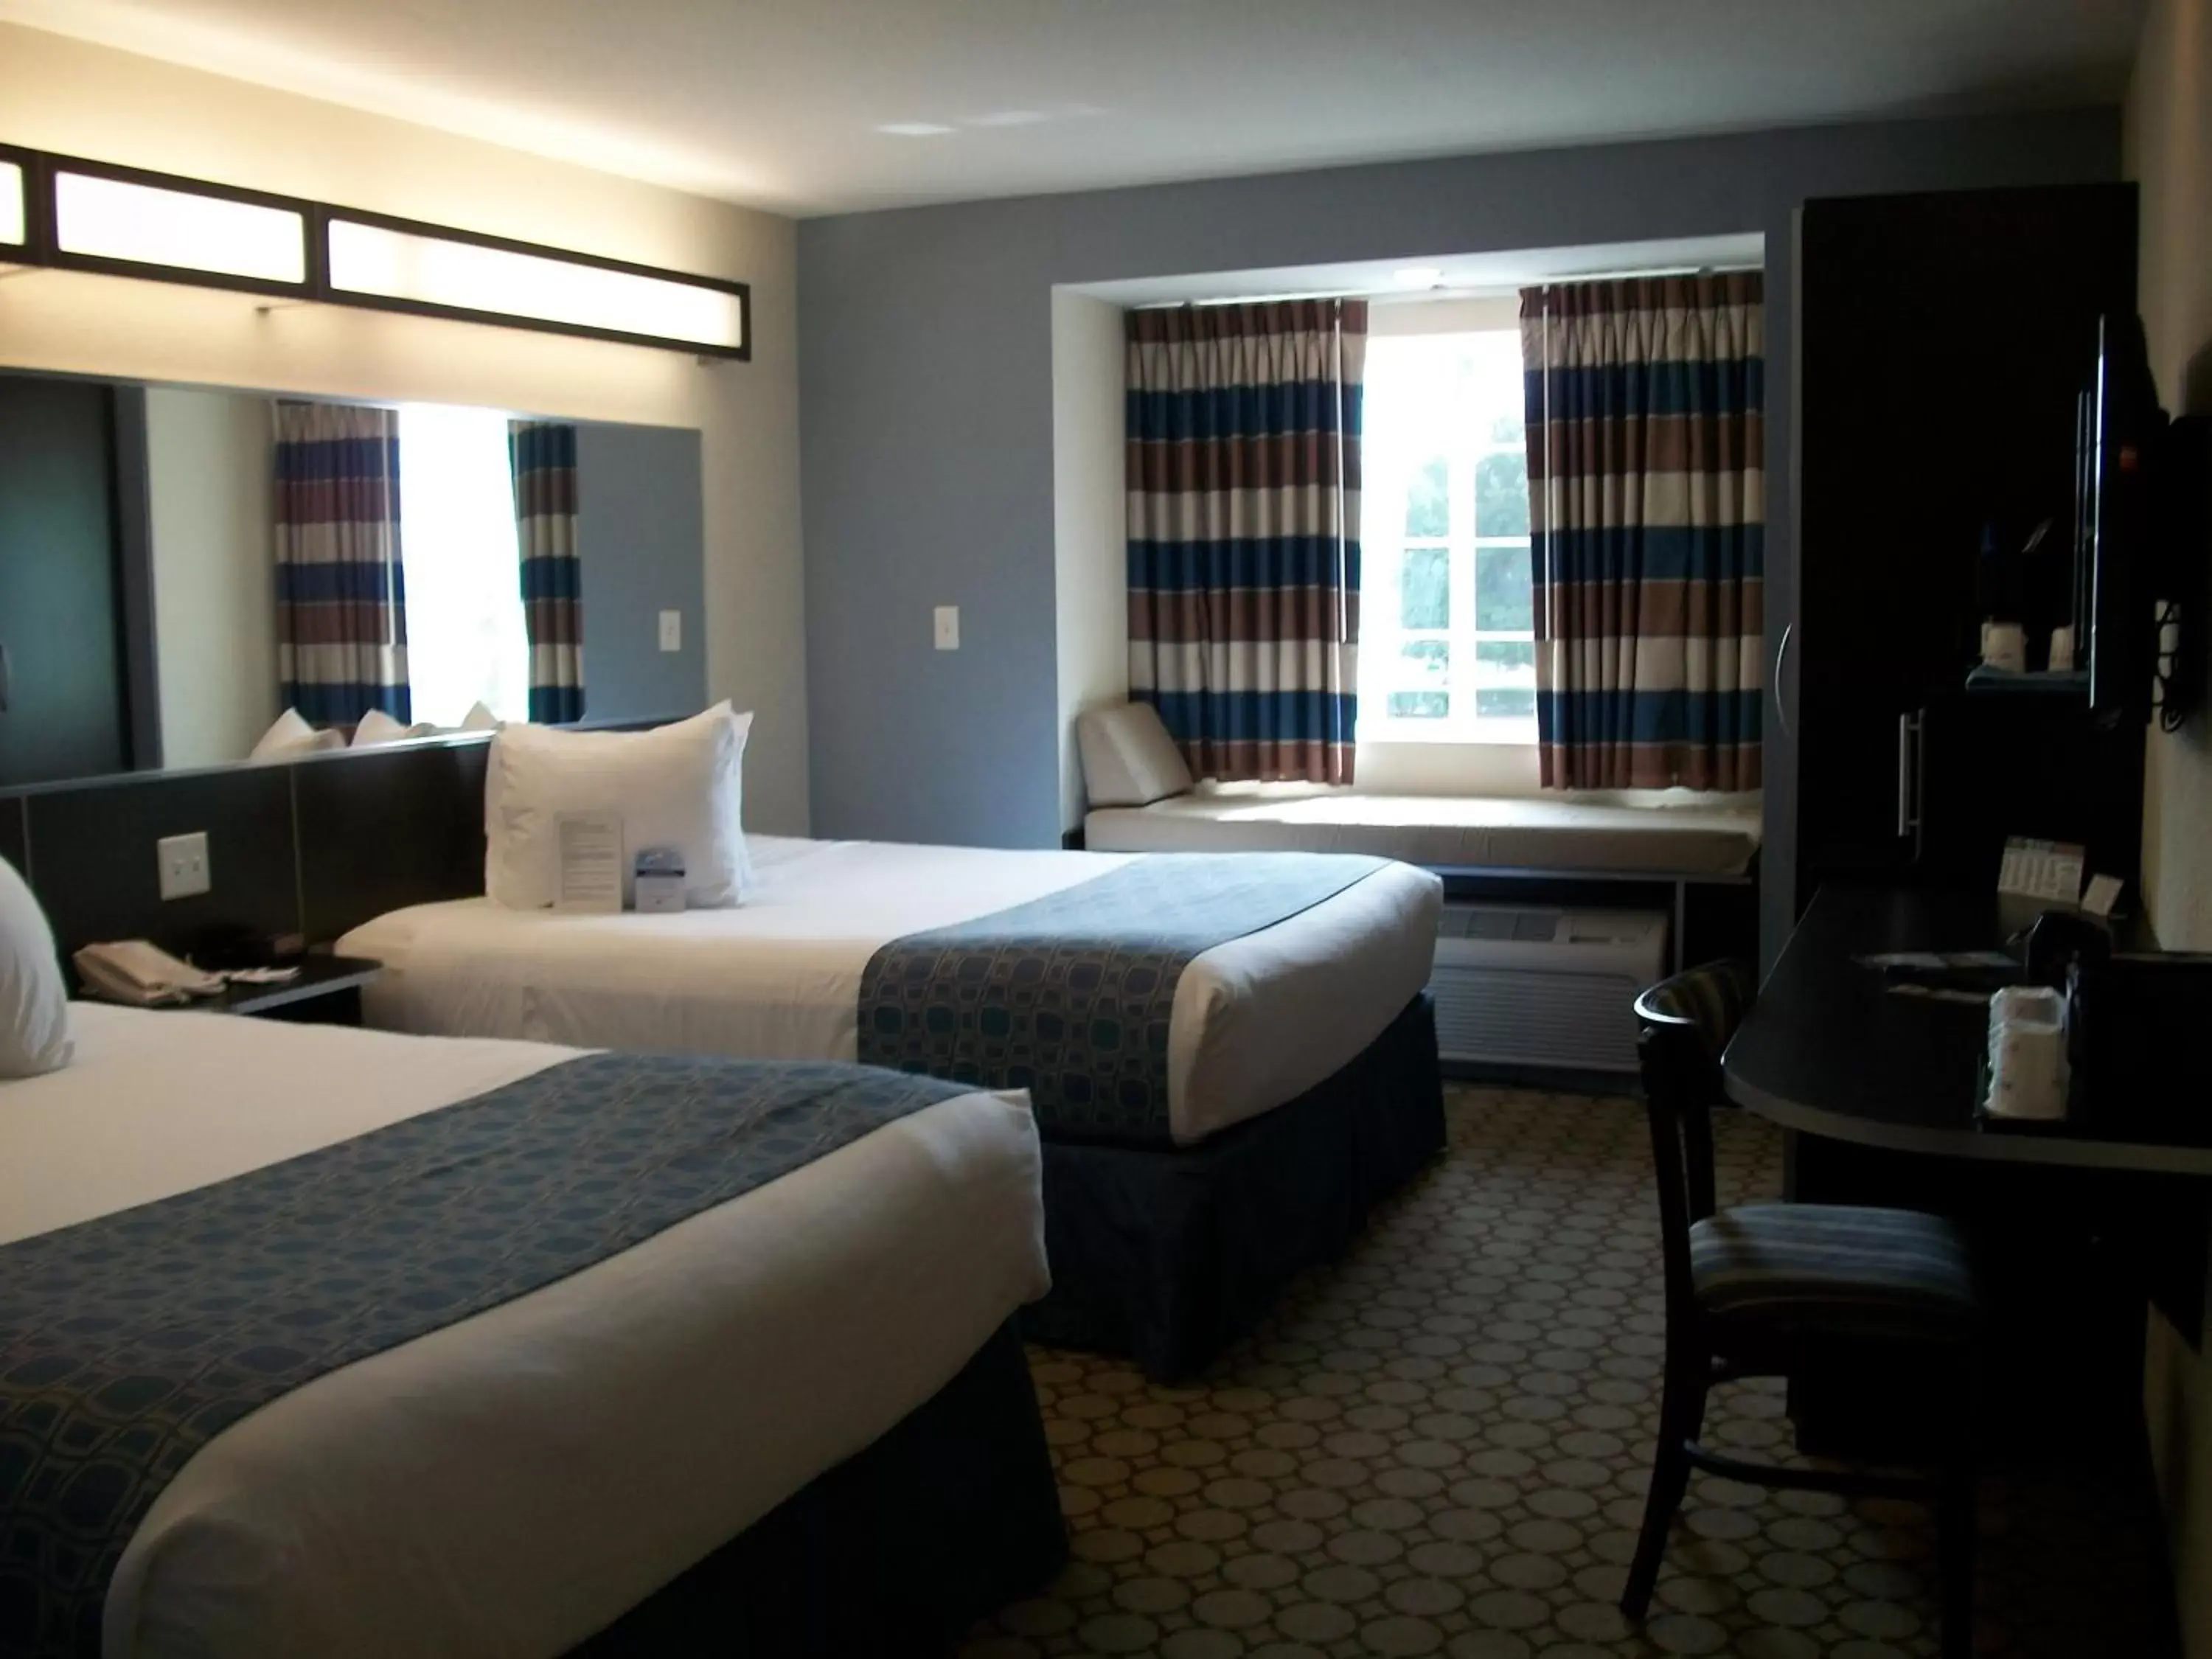 Deluxe Queen Room with Two Queen Beds - Disability Access - Non-Smoking in Microtel Inn & Suites by Wyndham Spring Hill/Weeki Wachee